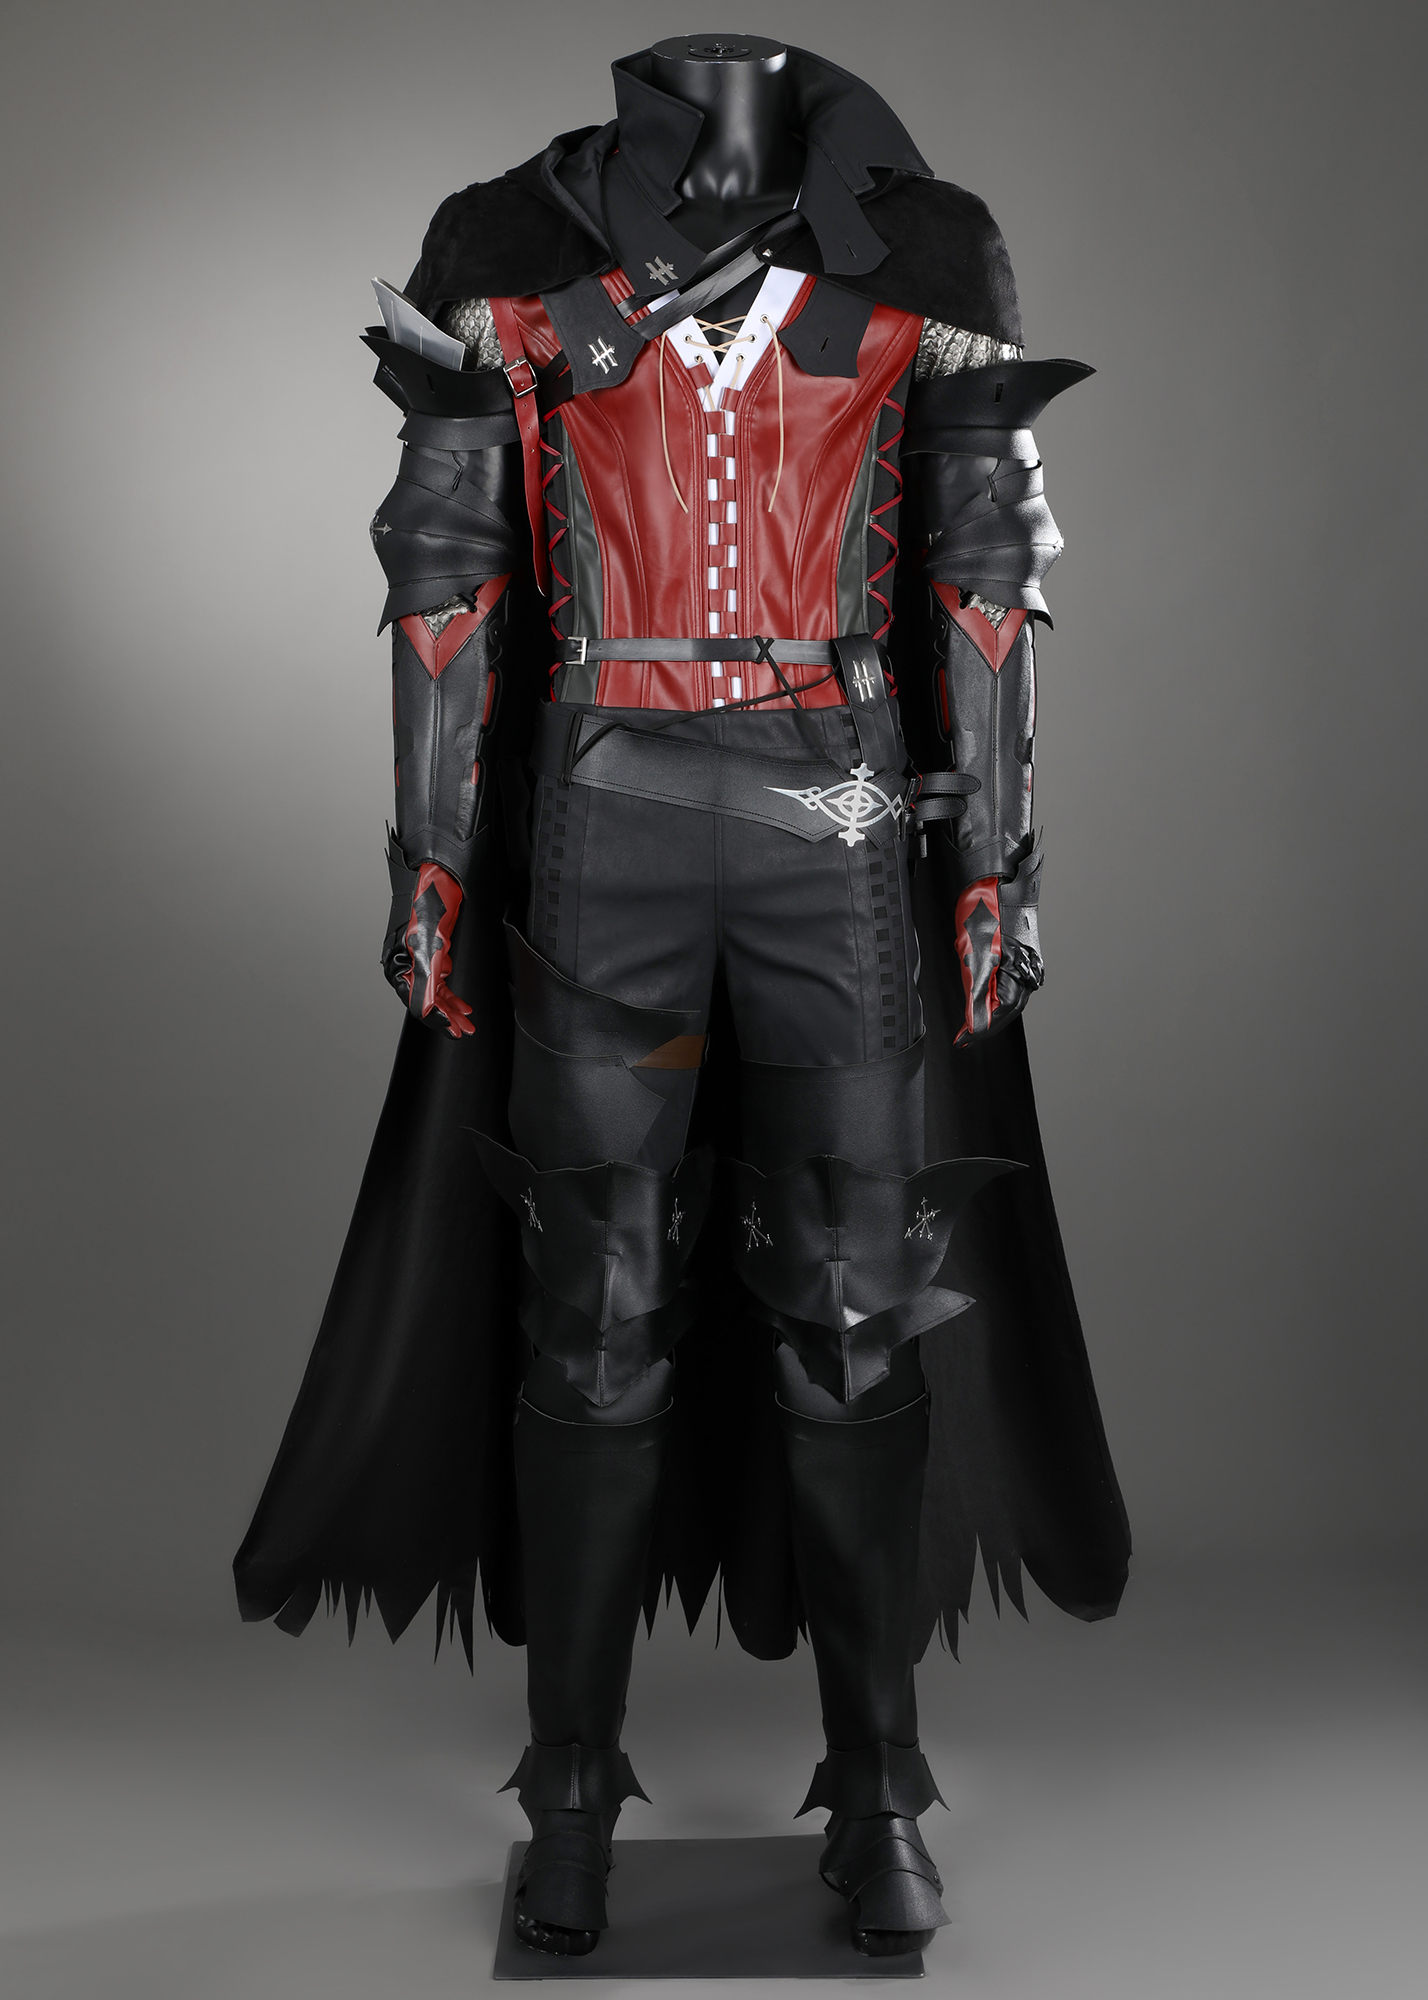 FF16 Clive Rosfield Costume Final Fantasy XVI Suit Cosplay